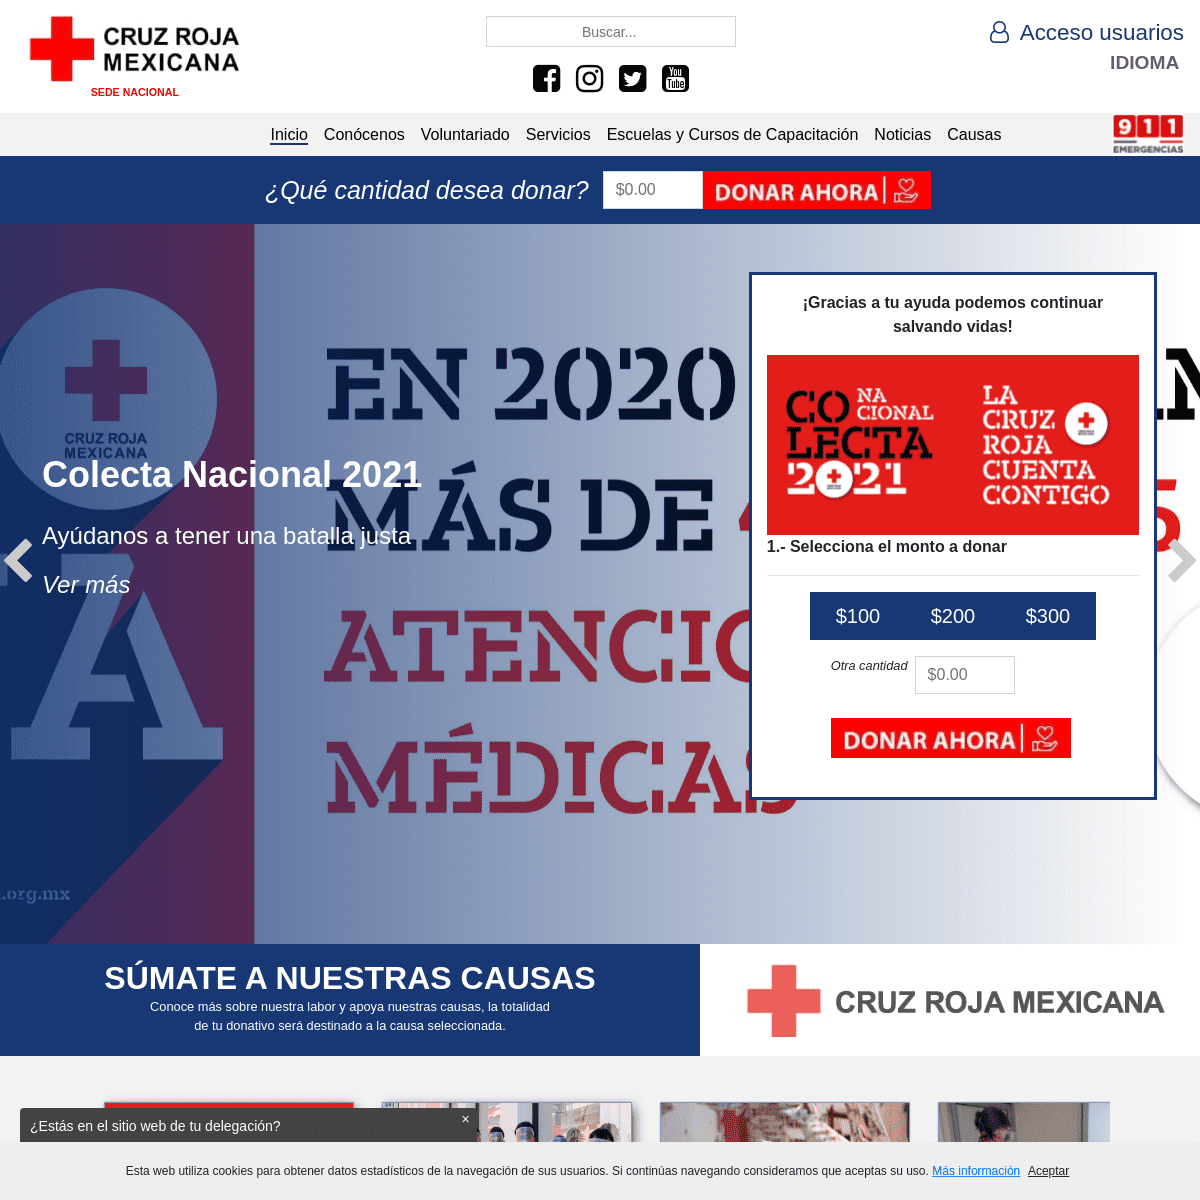 A complete backup of https://cruzrojamexicana.org.mx